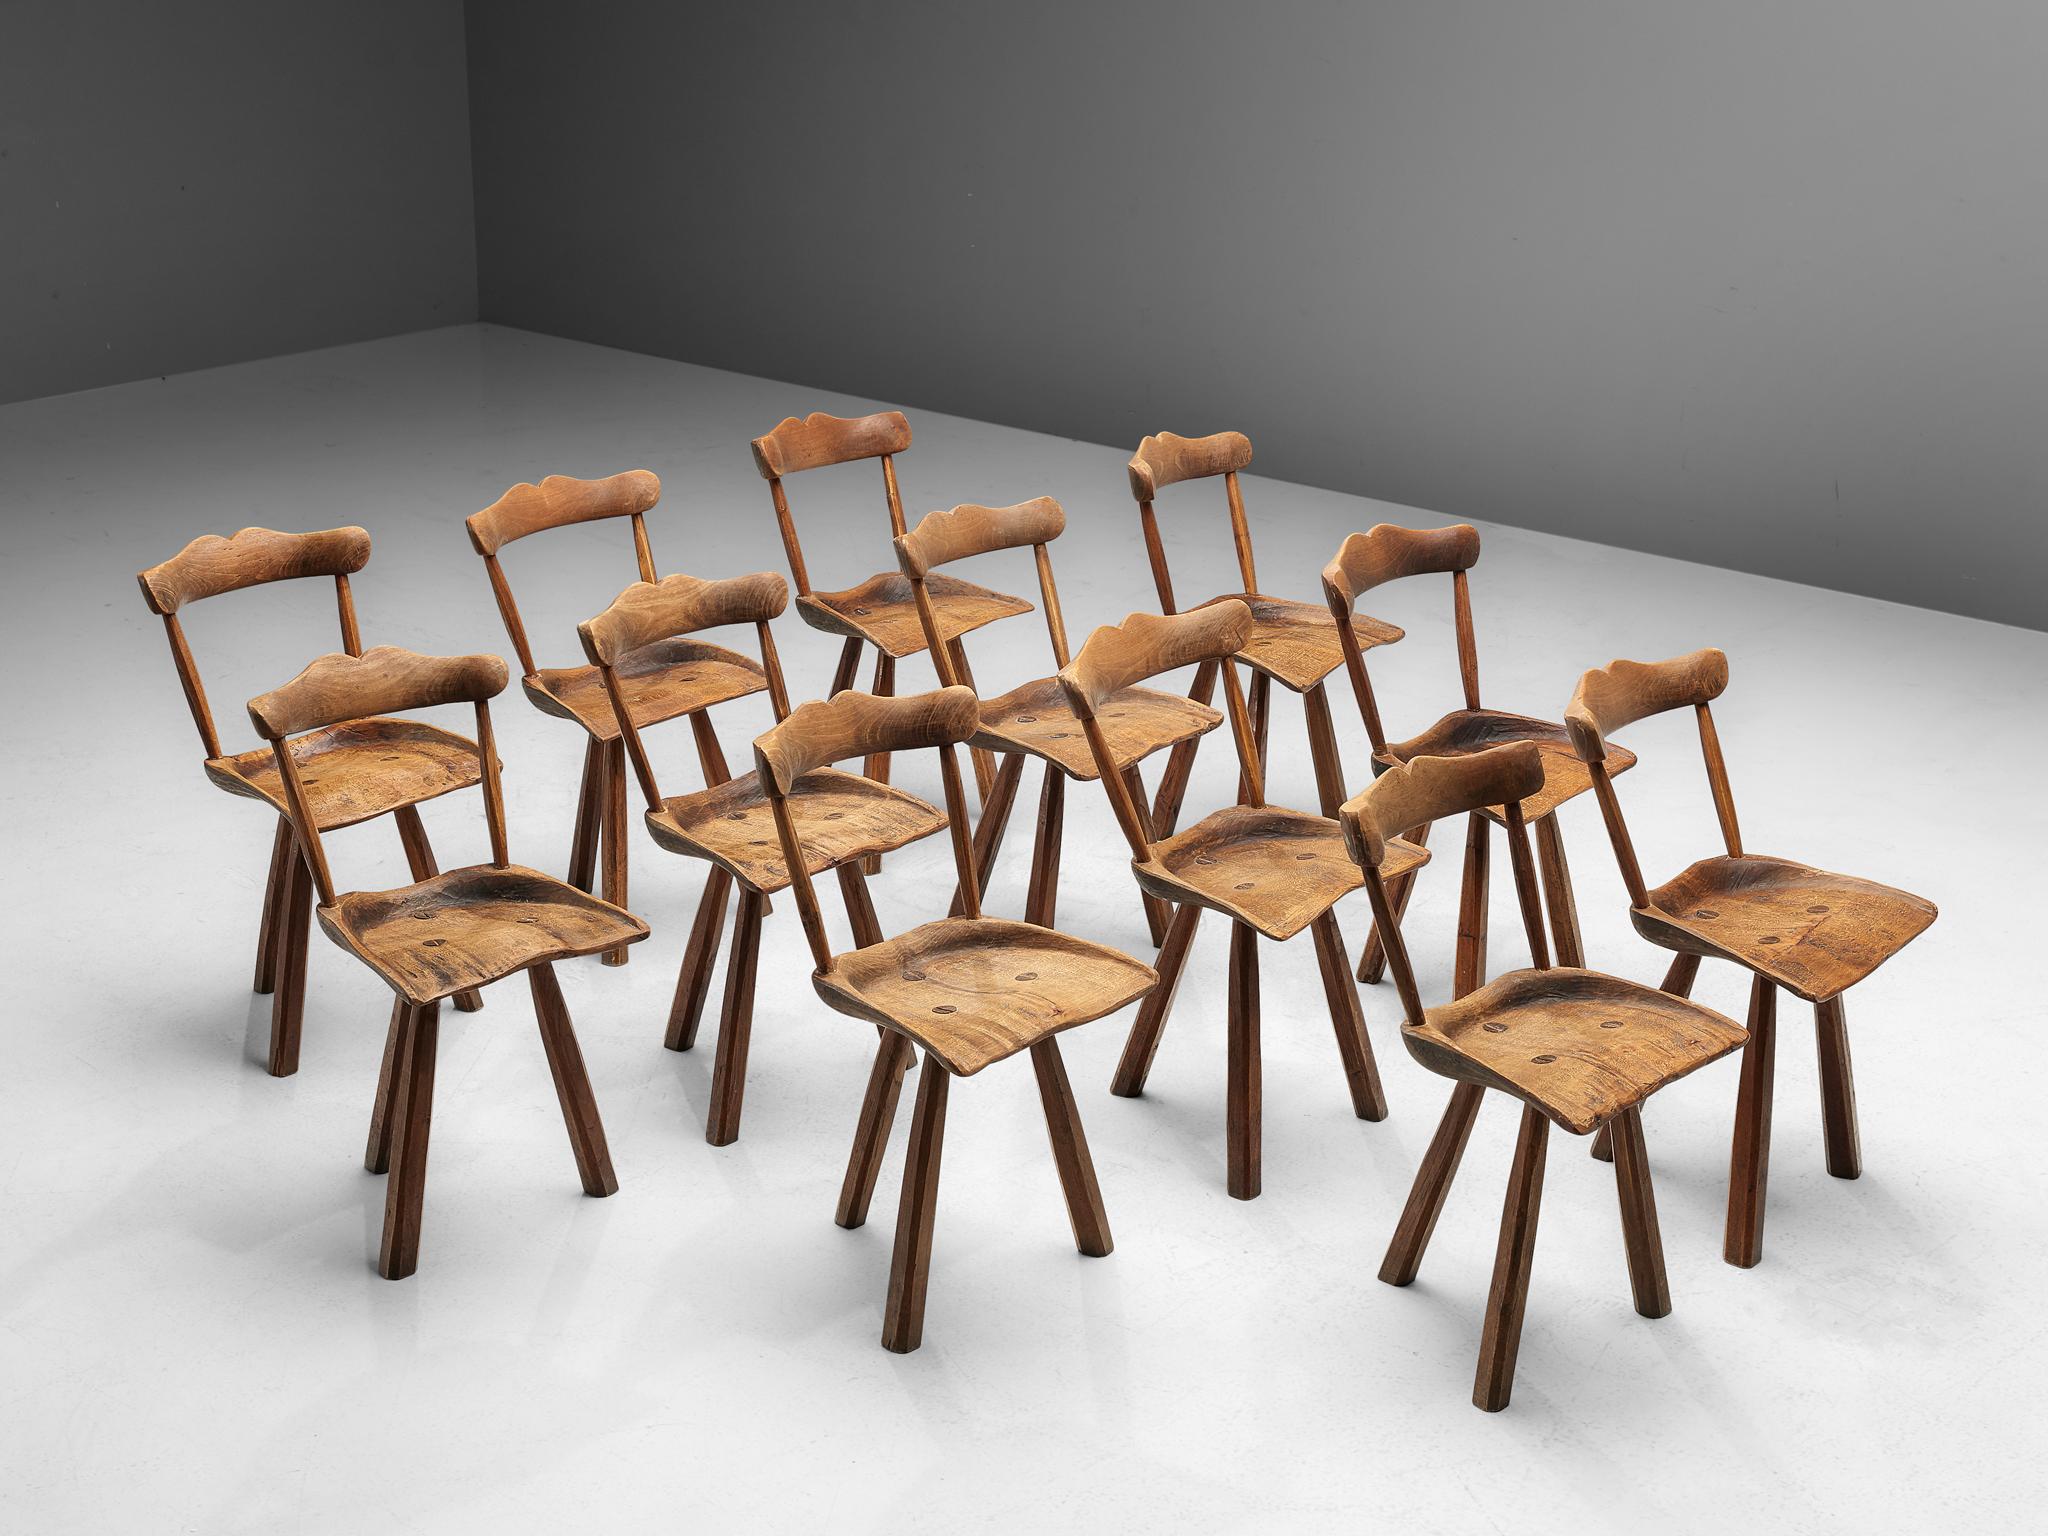 Set of twelve rustic dining chairs, beech, chestnut, Europe, 1950s

The set of twelve dining chairs consists out of beech and three chestnut wooden legs. Their rustic appearance is matched with important design details. Per example the visibility of